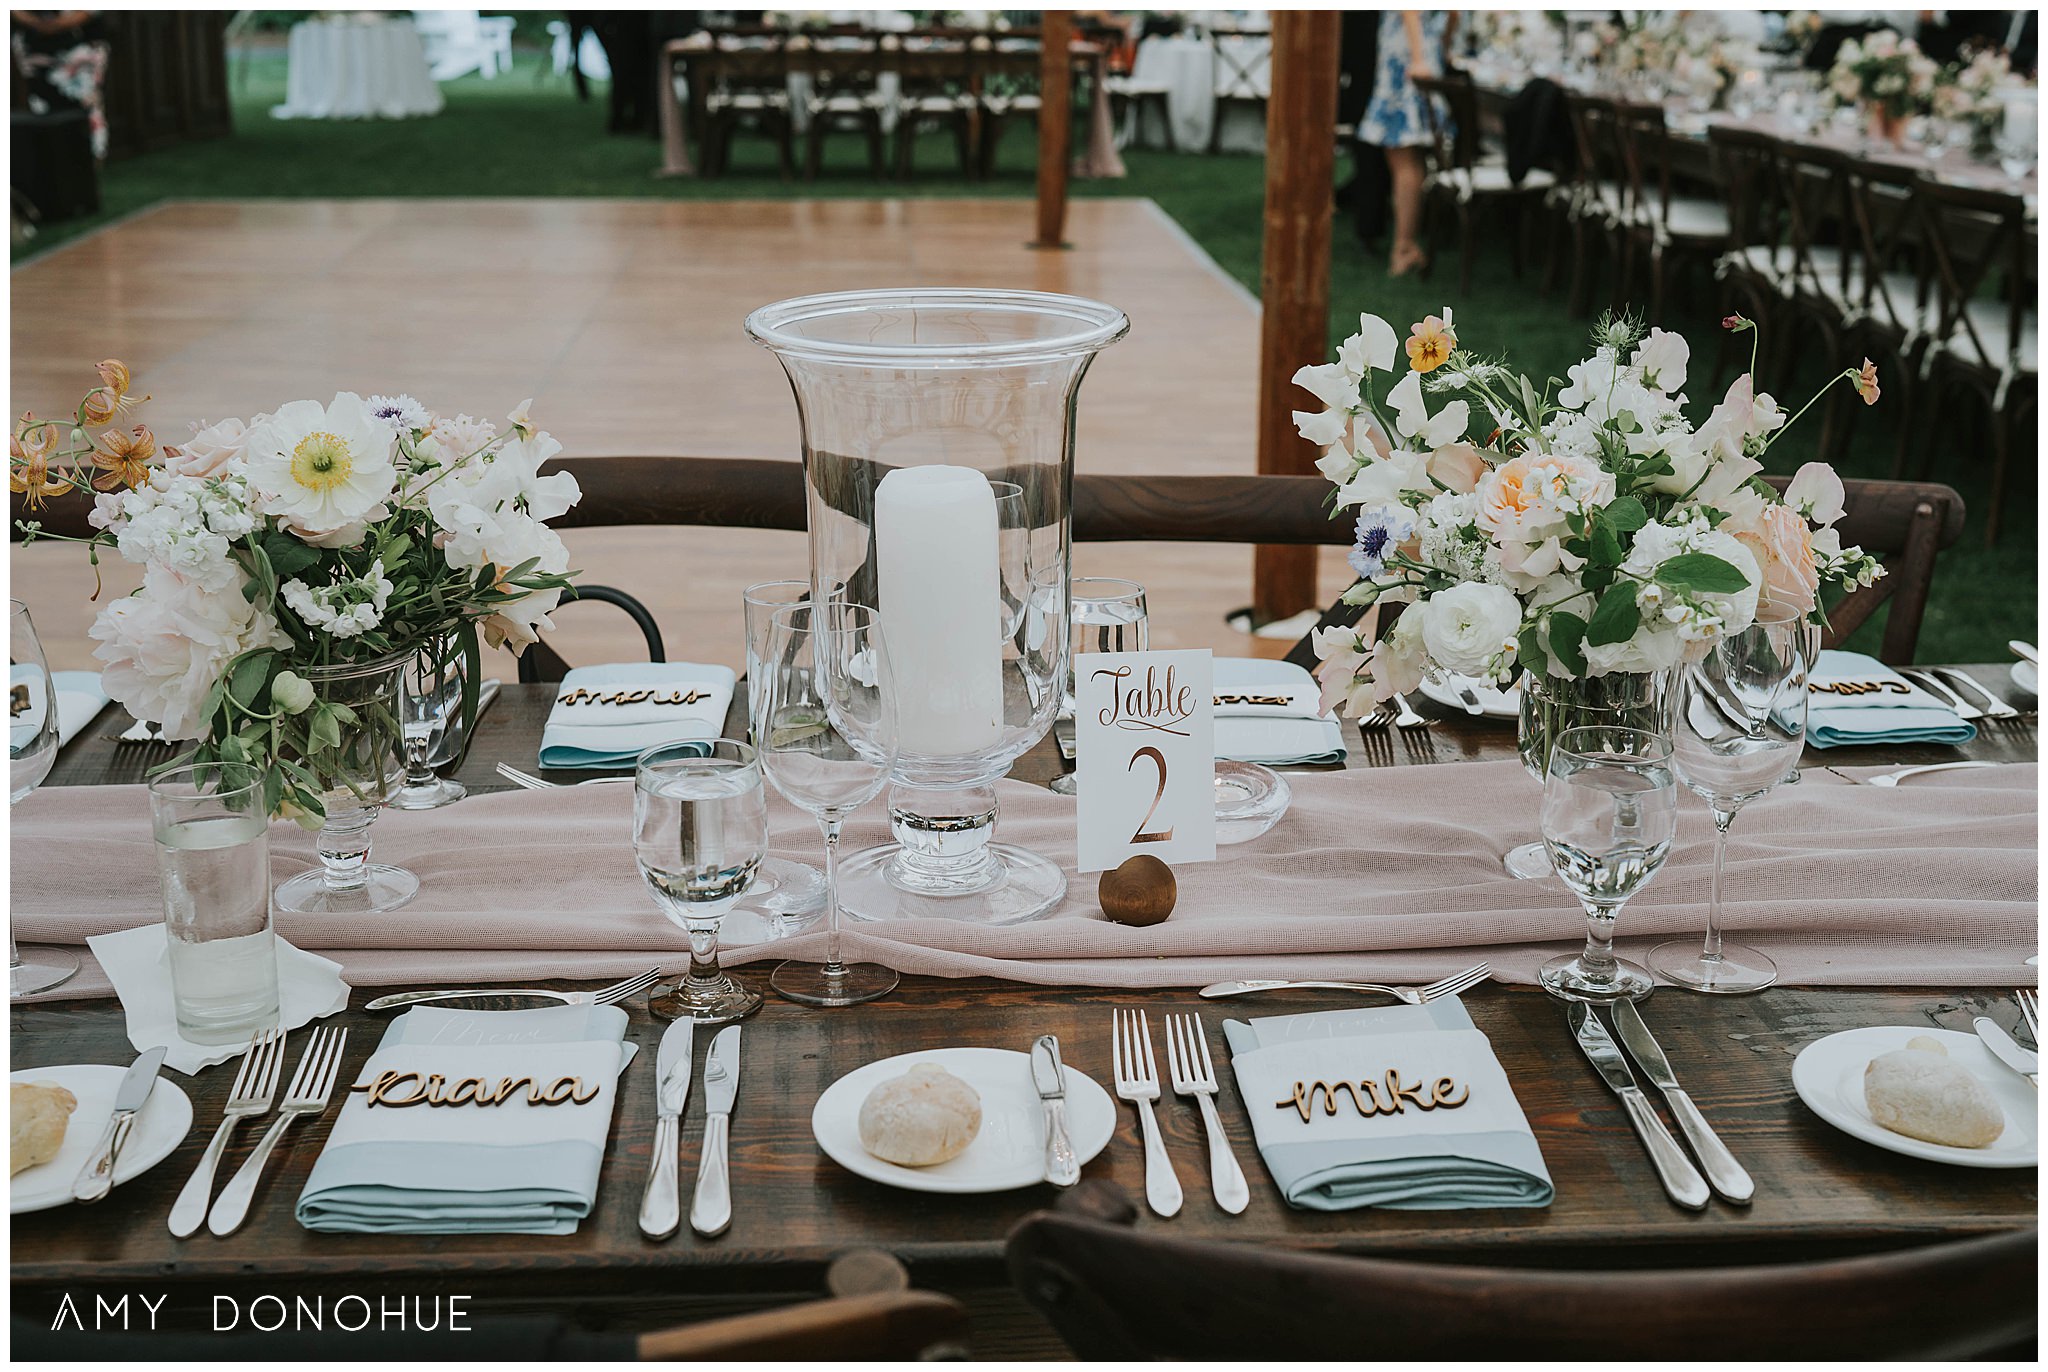 Reception details by Birds of a Flower with Simon Pearce Glassware | Woodstock Vermont Wedding Photographer | © Amy Donohue Photography